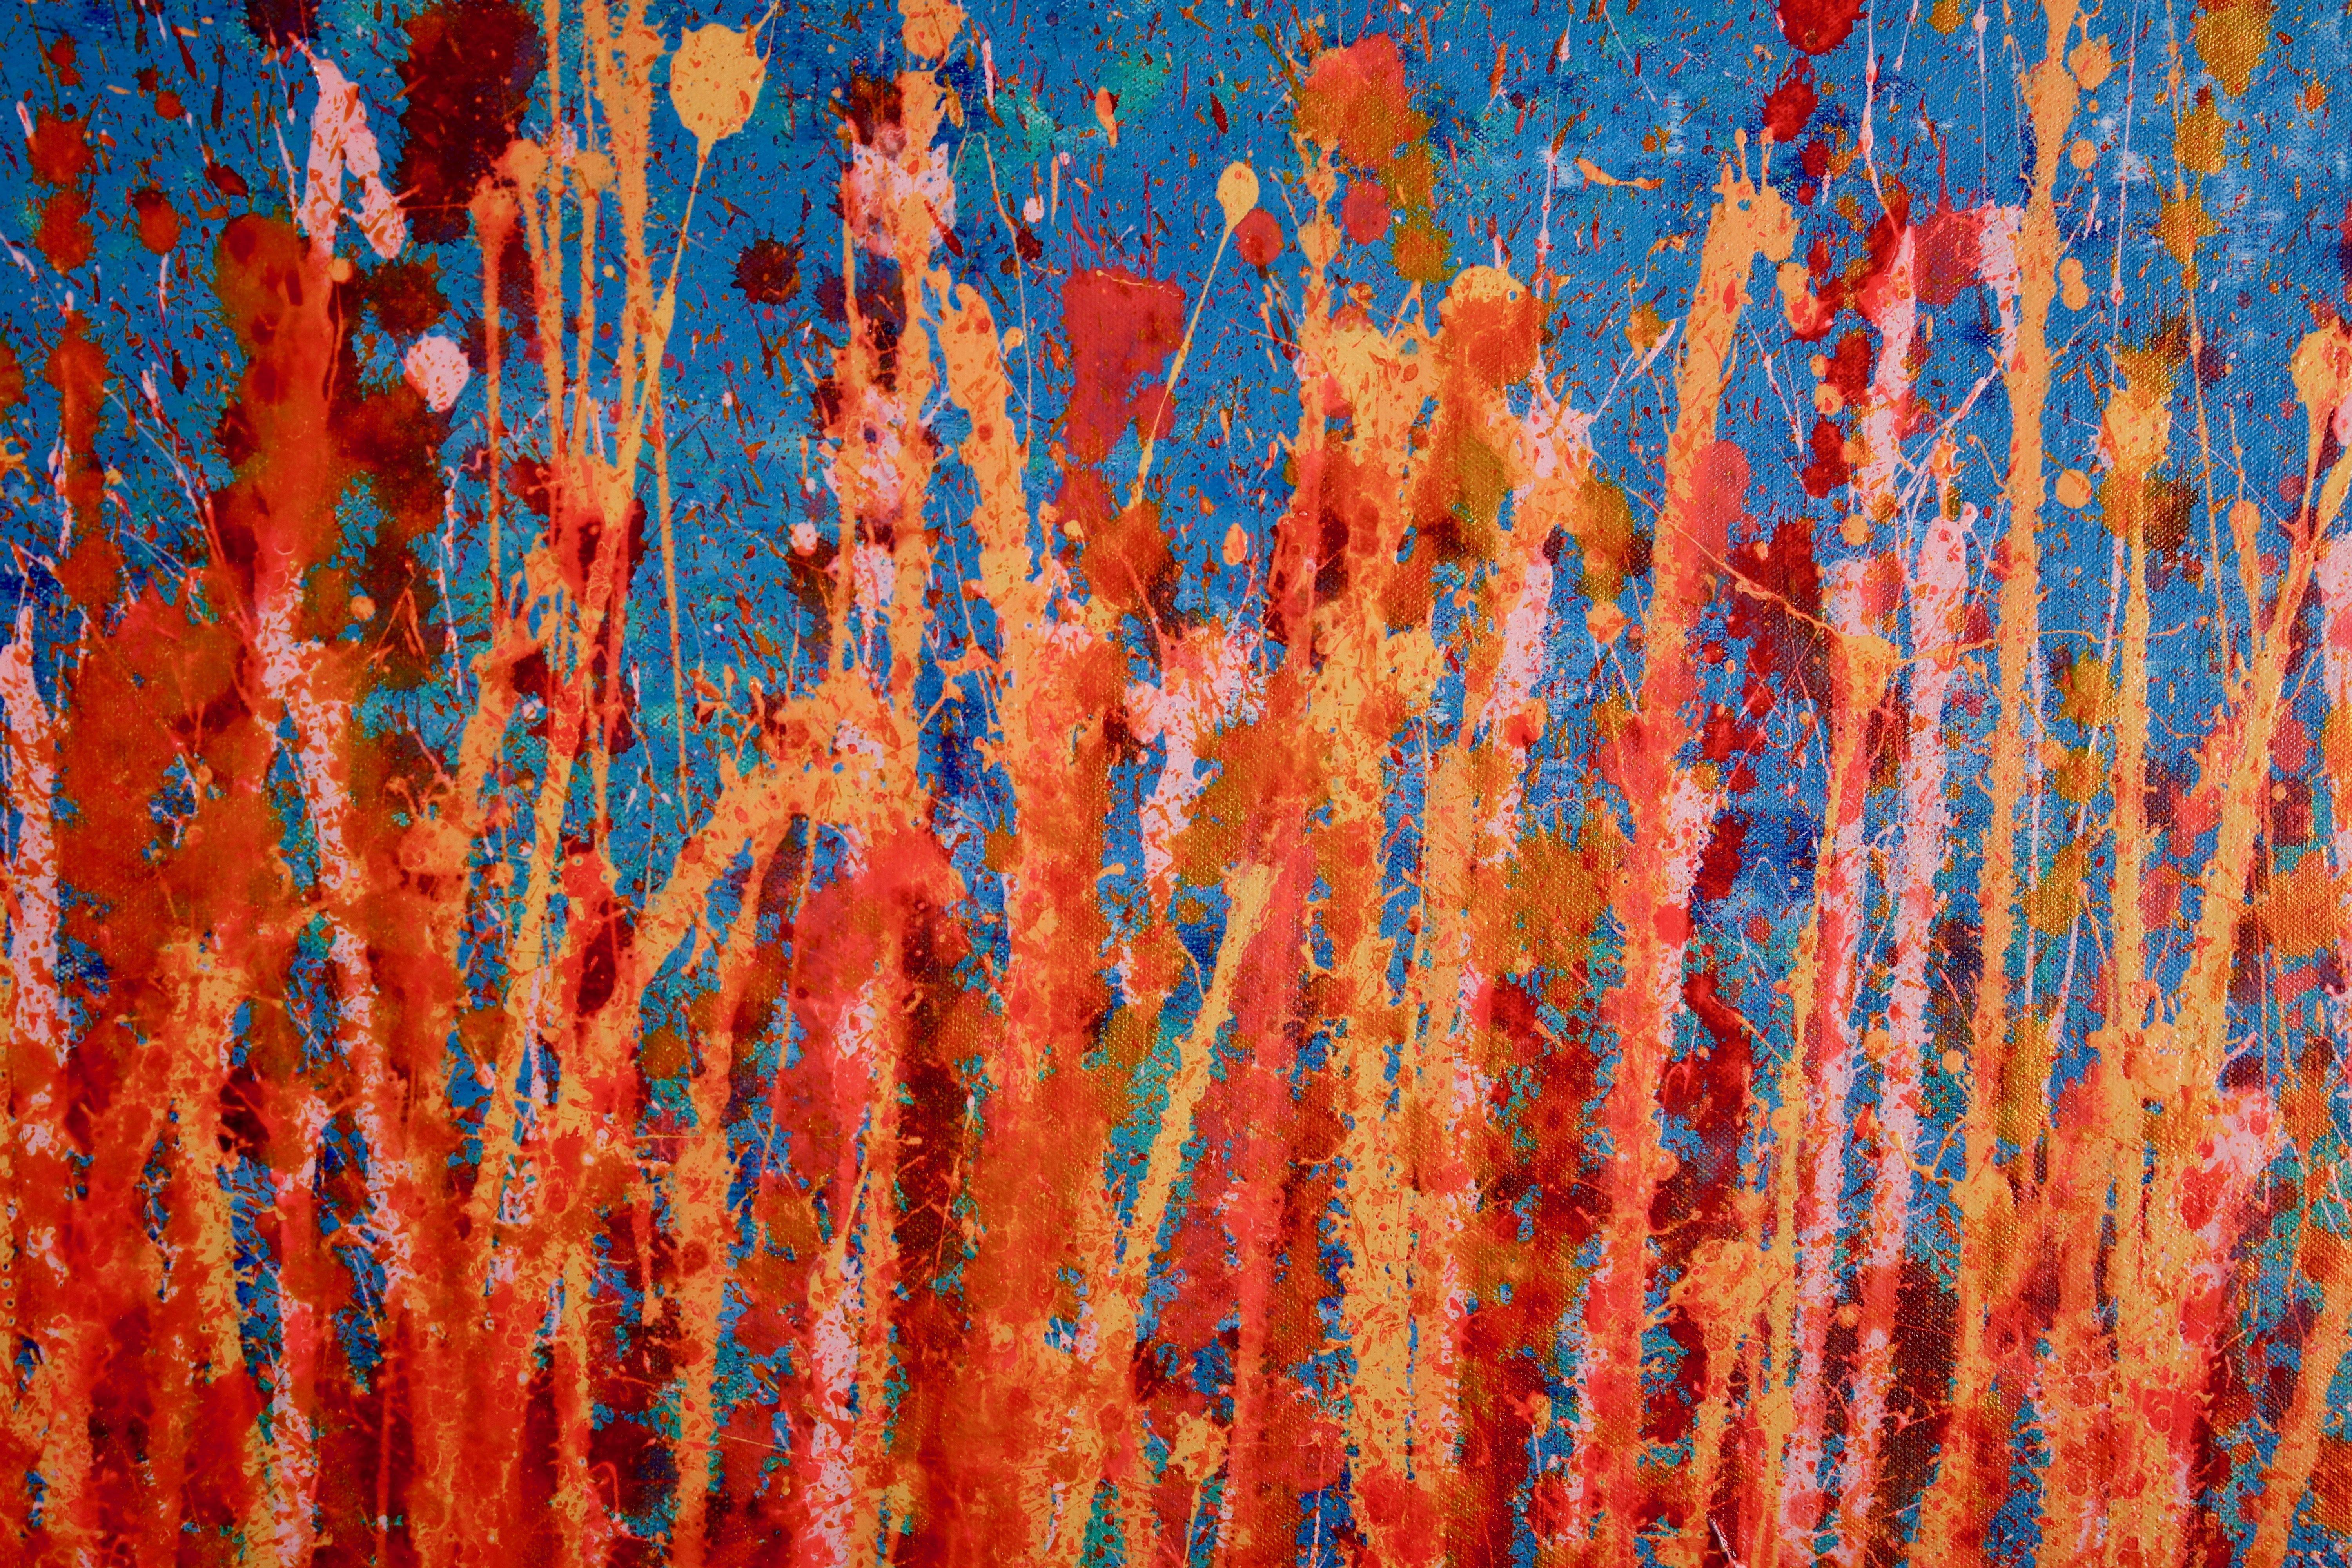 Striking and bold color combination, orange and blue in gestural paint strokes over and over again. Textured and layered with fluid translucent acrylics and iridescent mediums.    ORIGINAL FINE ABSTRACTS - ONE OF A KIND!  I only make original works.